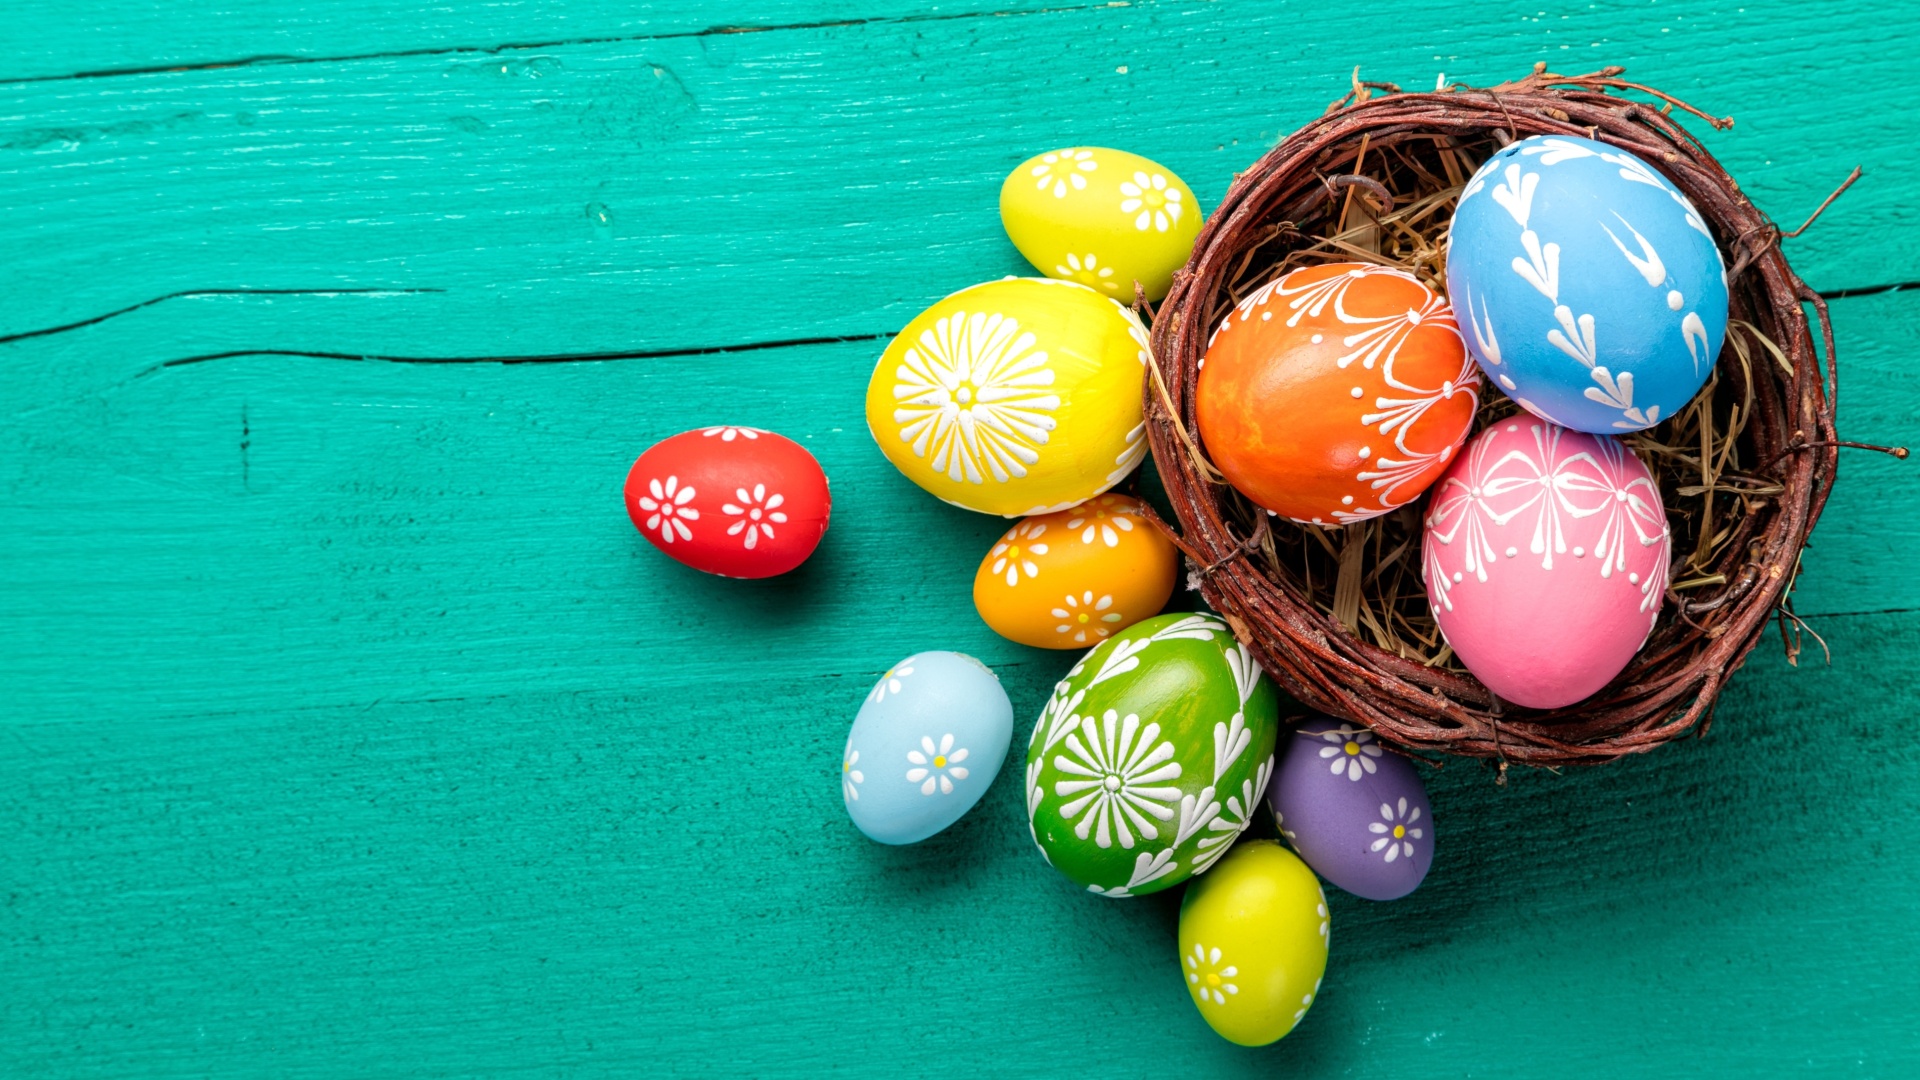 Dyed easter eggs wallpaper 1920x1080